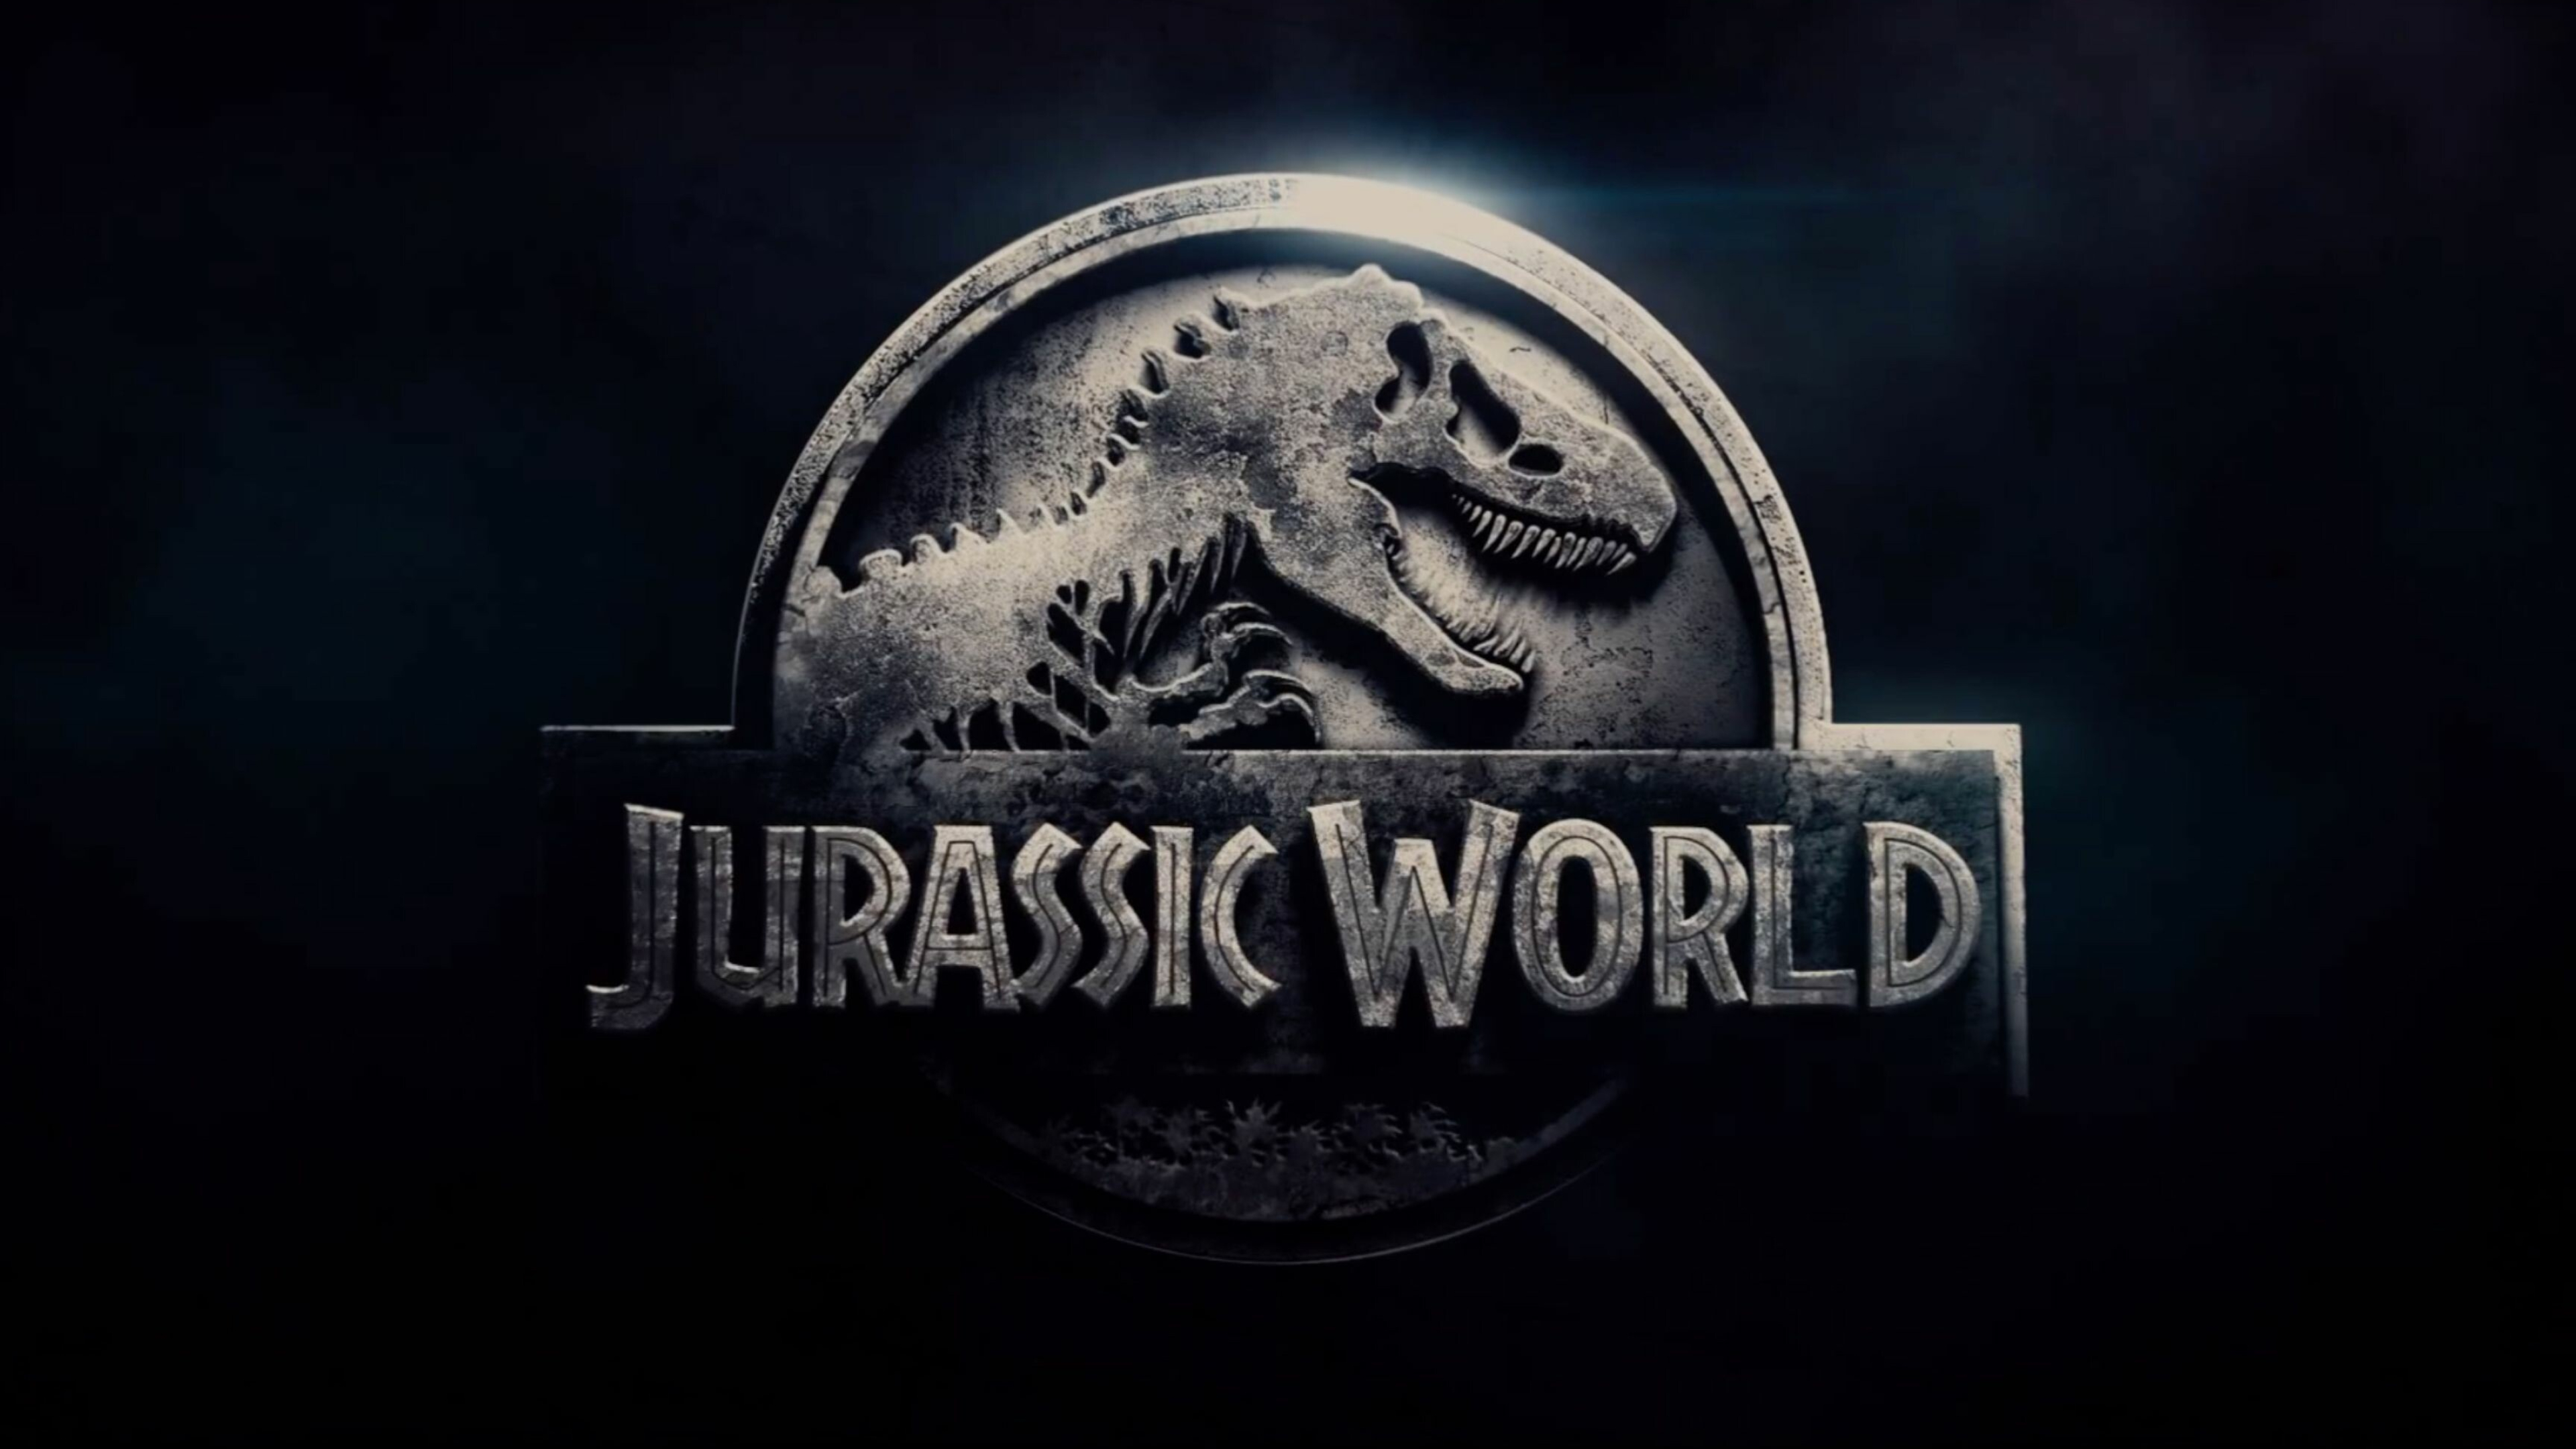 Jurassic World: The story, set 22 years after the events of Jurassic Park. 3840x2160 4K Wallpaper.